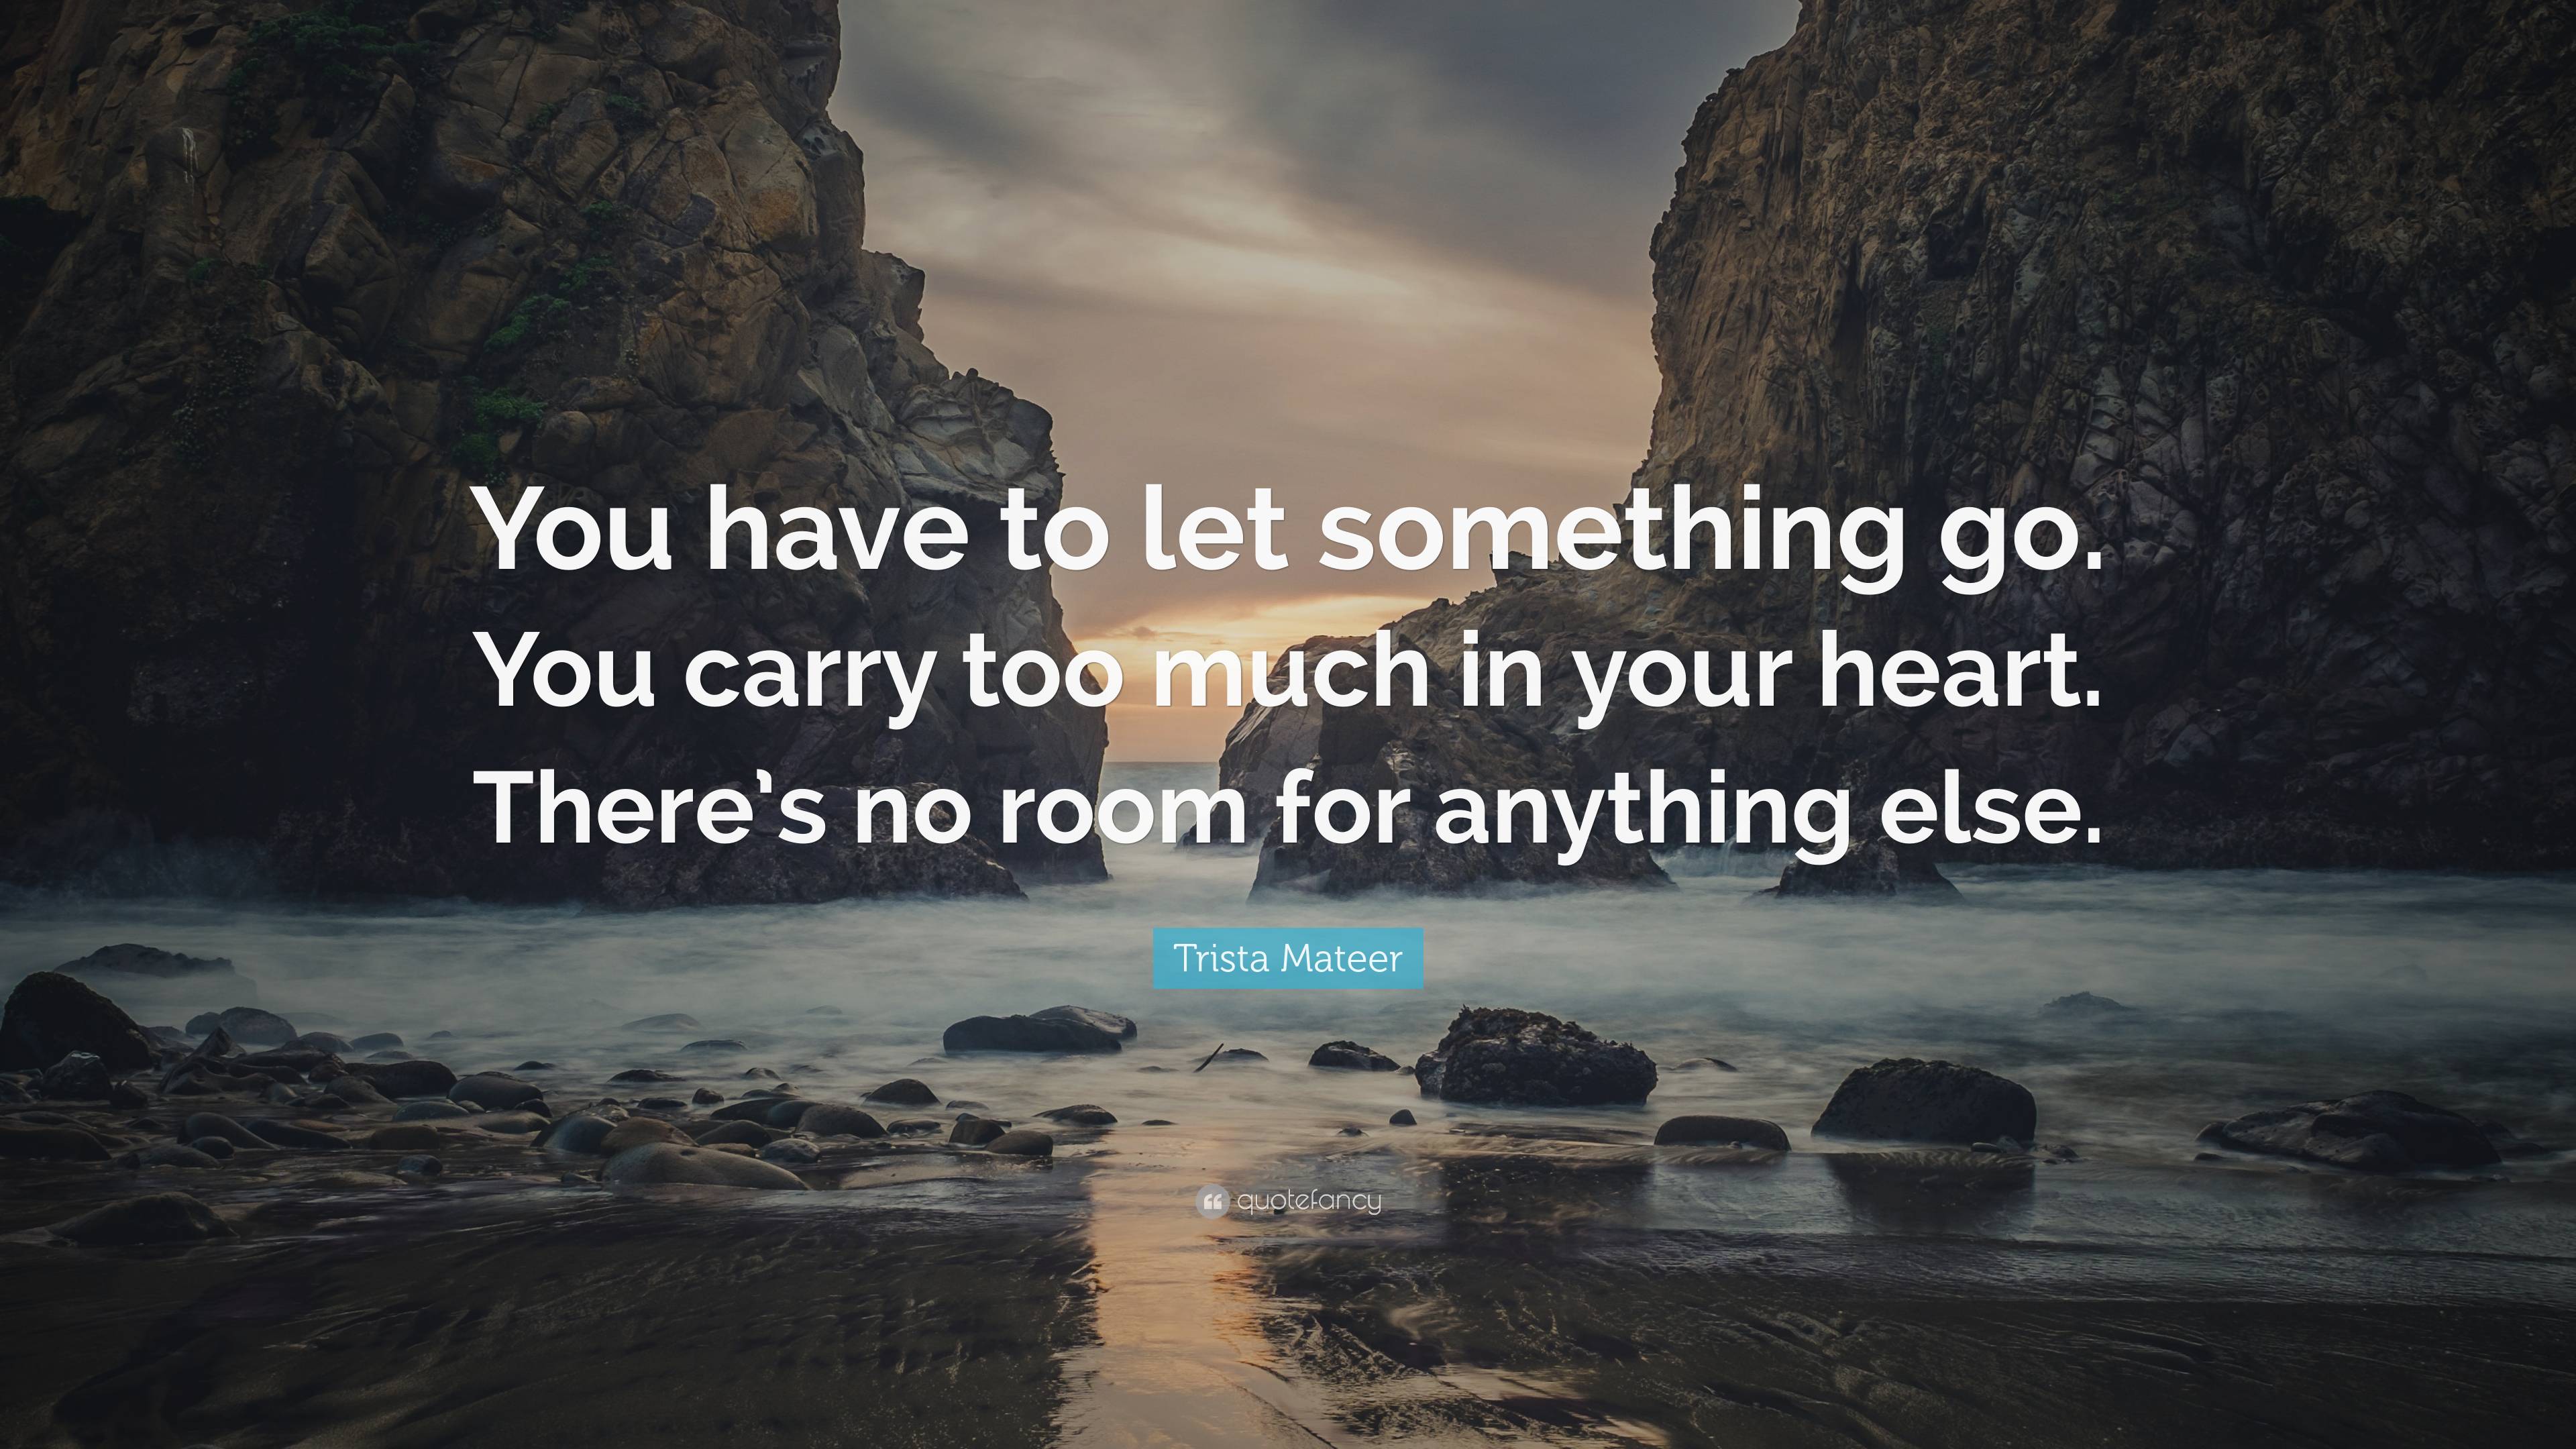 Trista Mateer Quote: “You have to let something go. You carry too much ...